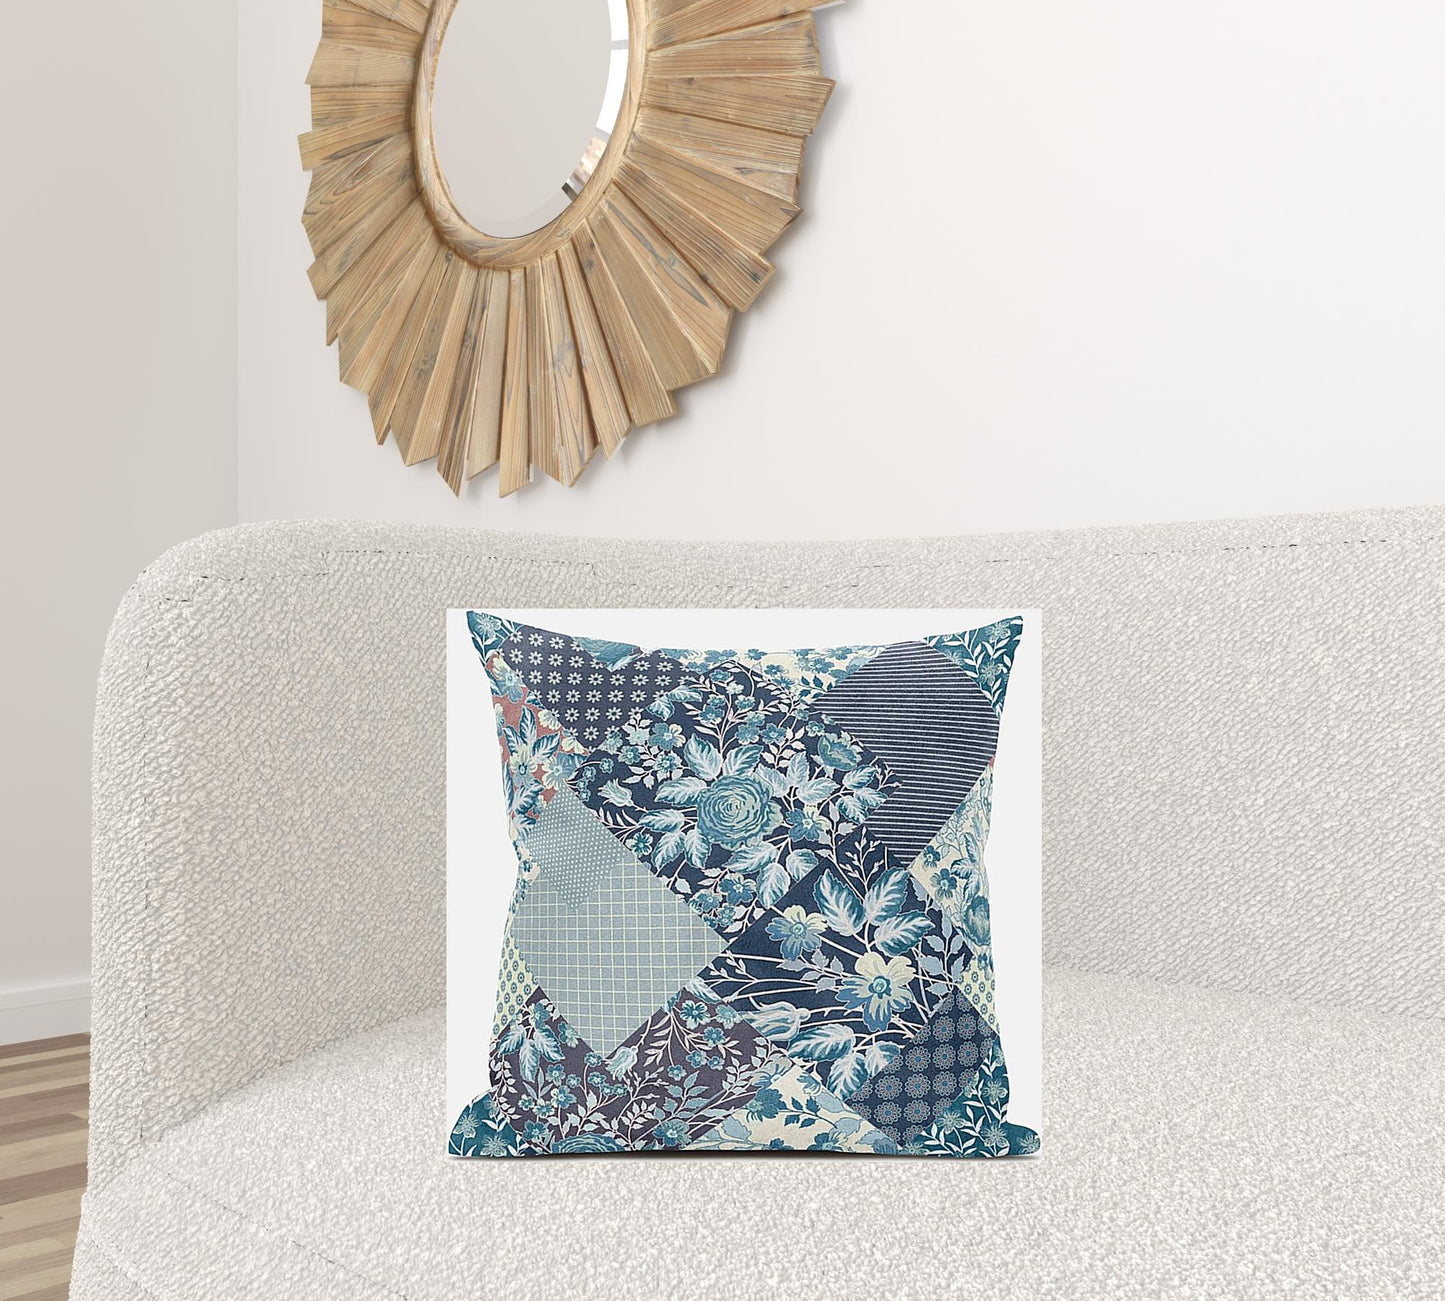 18" Blue White Floral Suede Throw Pillow